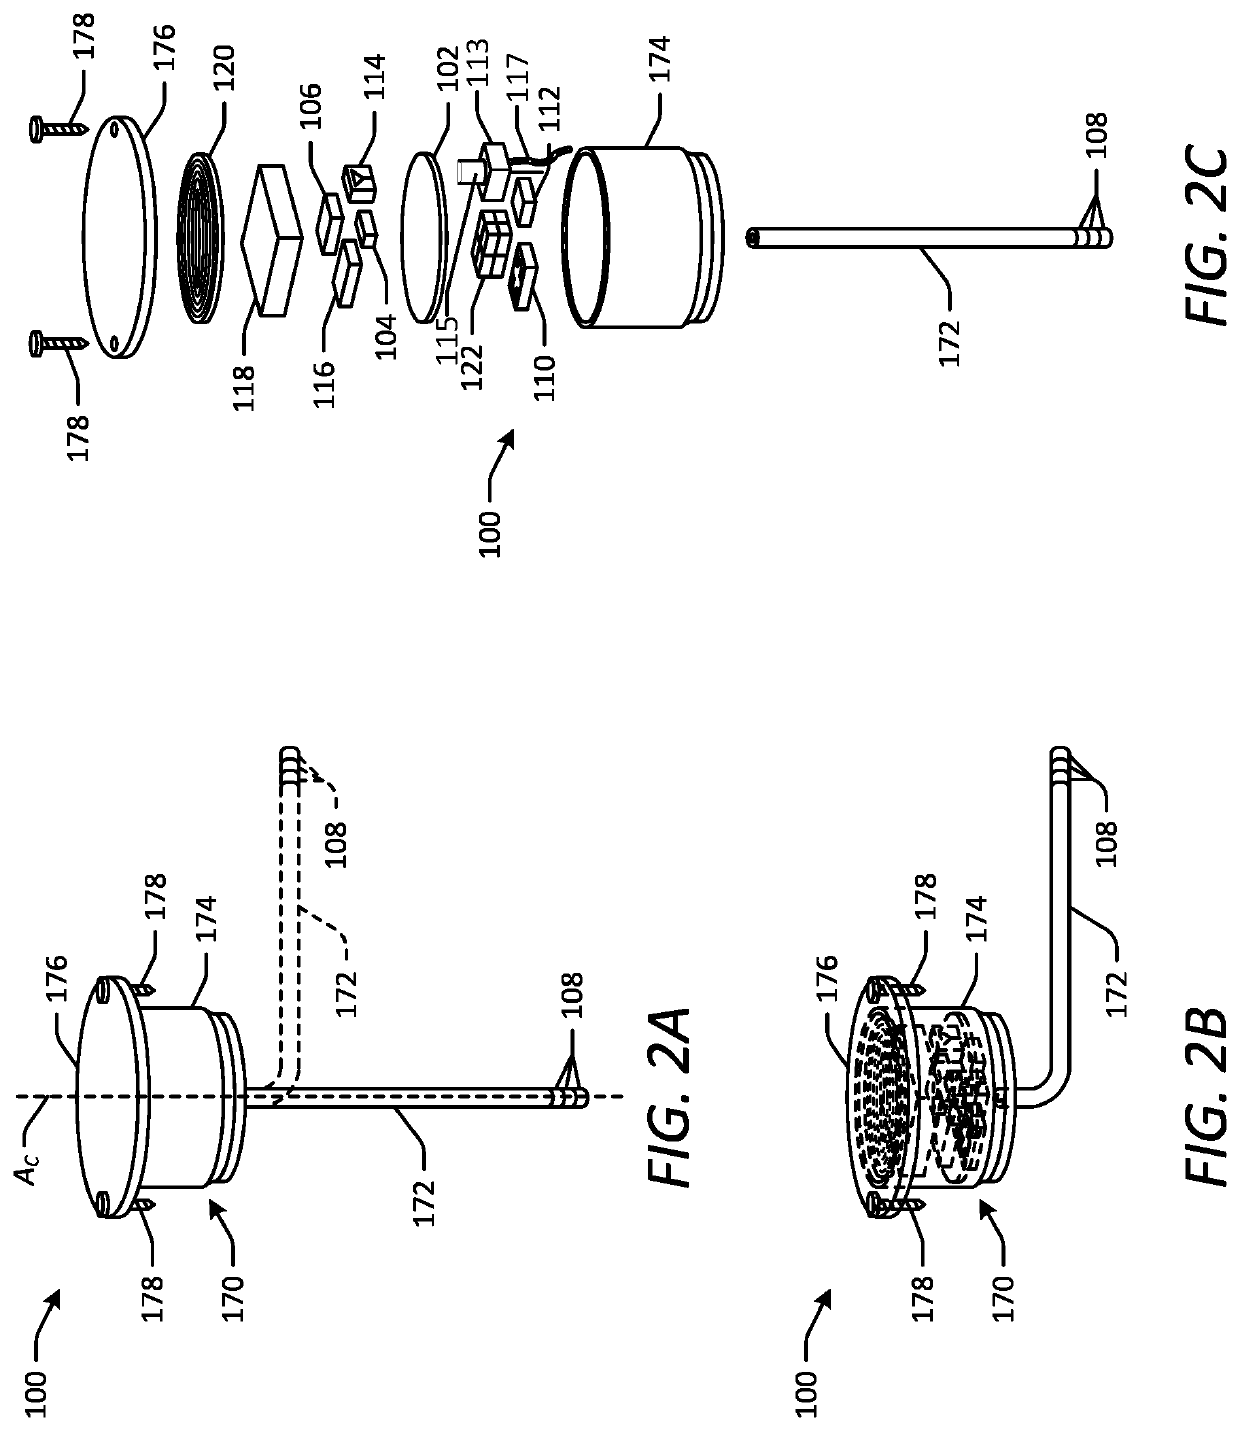 Implantable devices and related methods for monitoring properties of cerebrospinal fluid